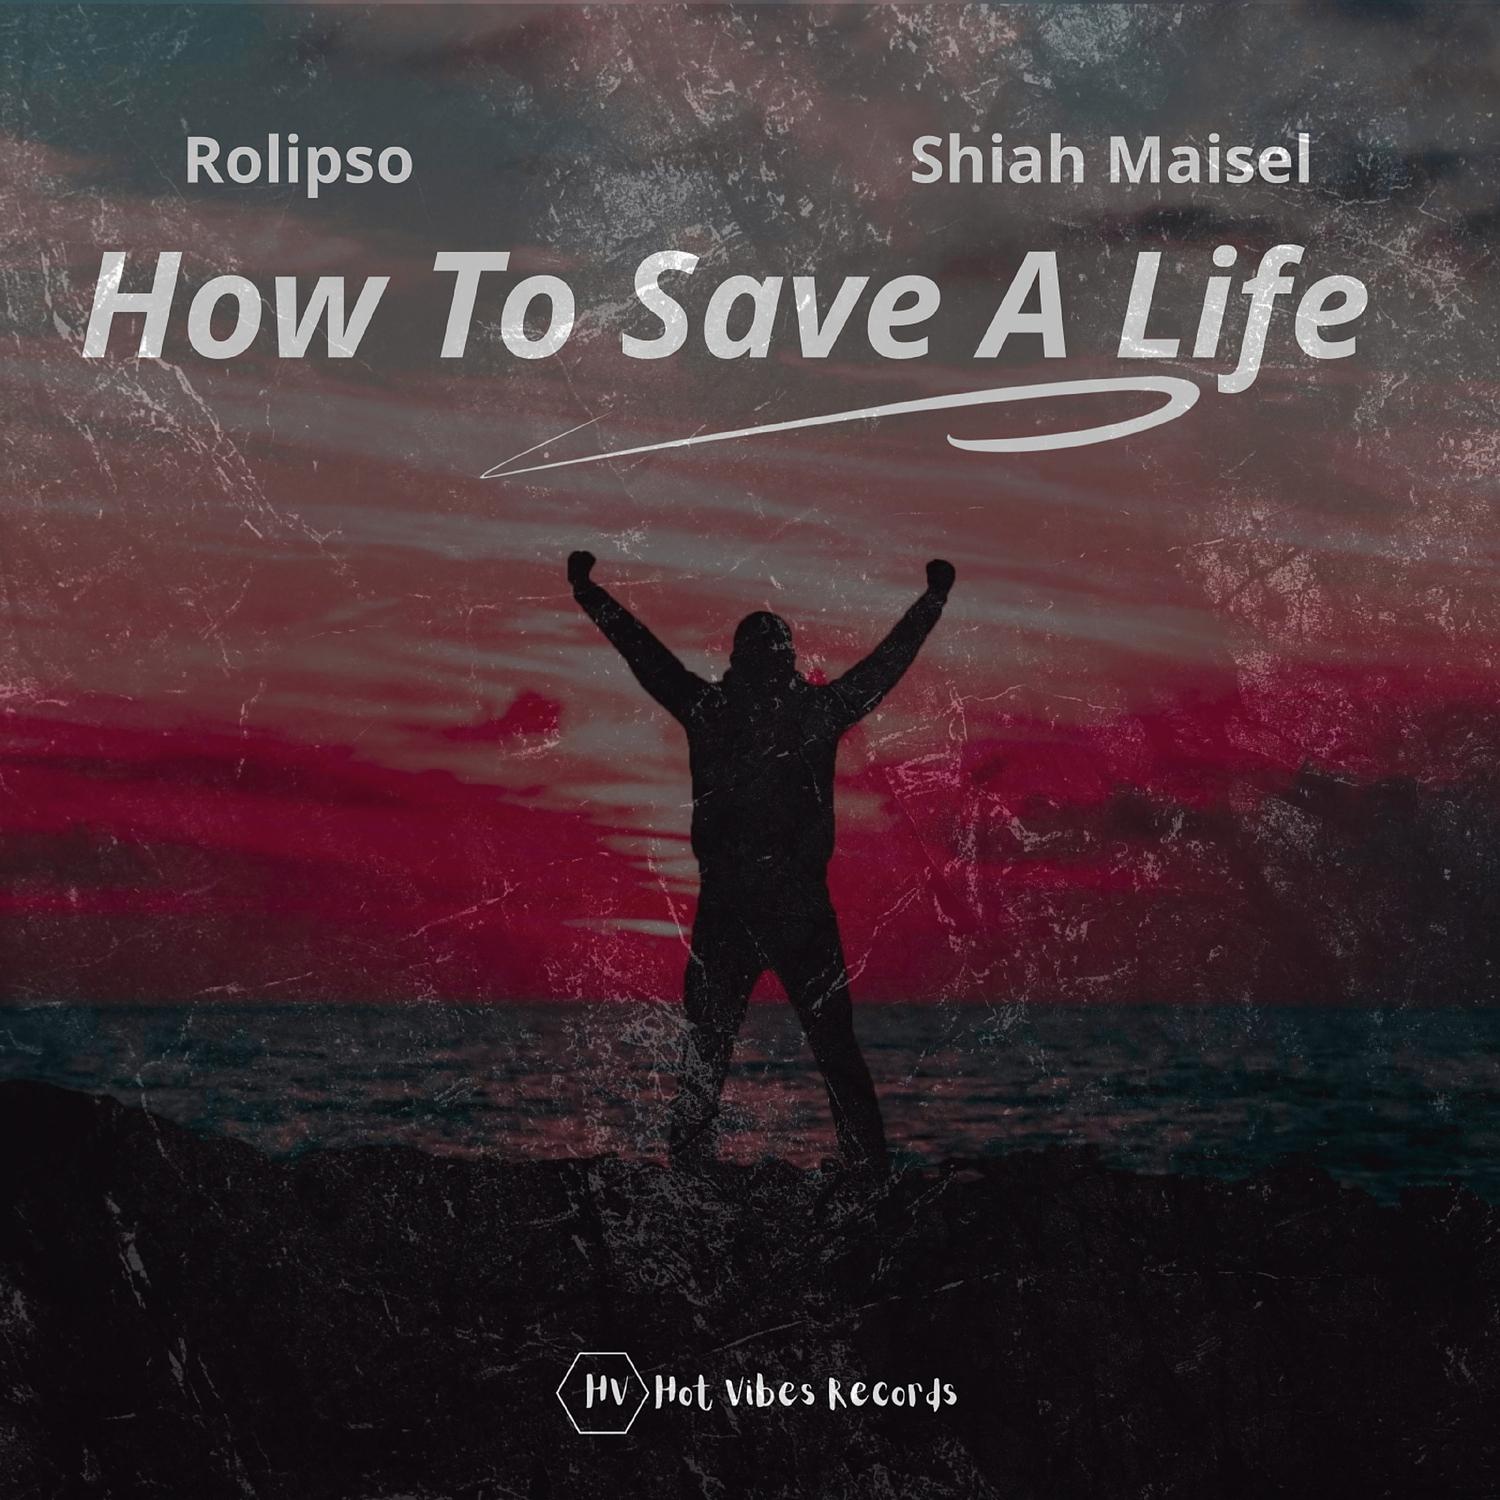 Rolipso - How to Save a Life